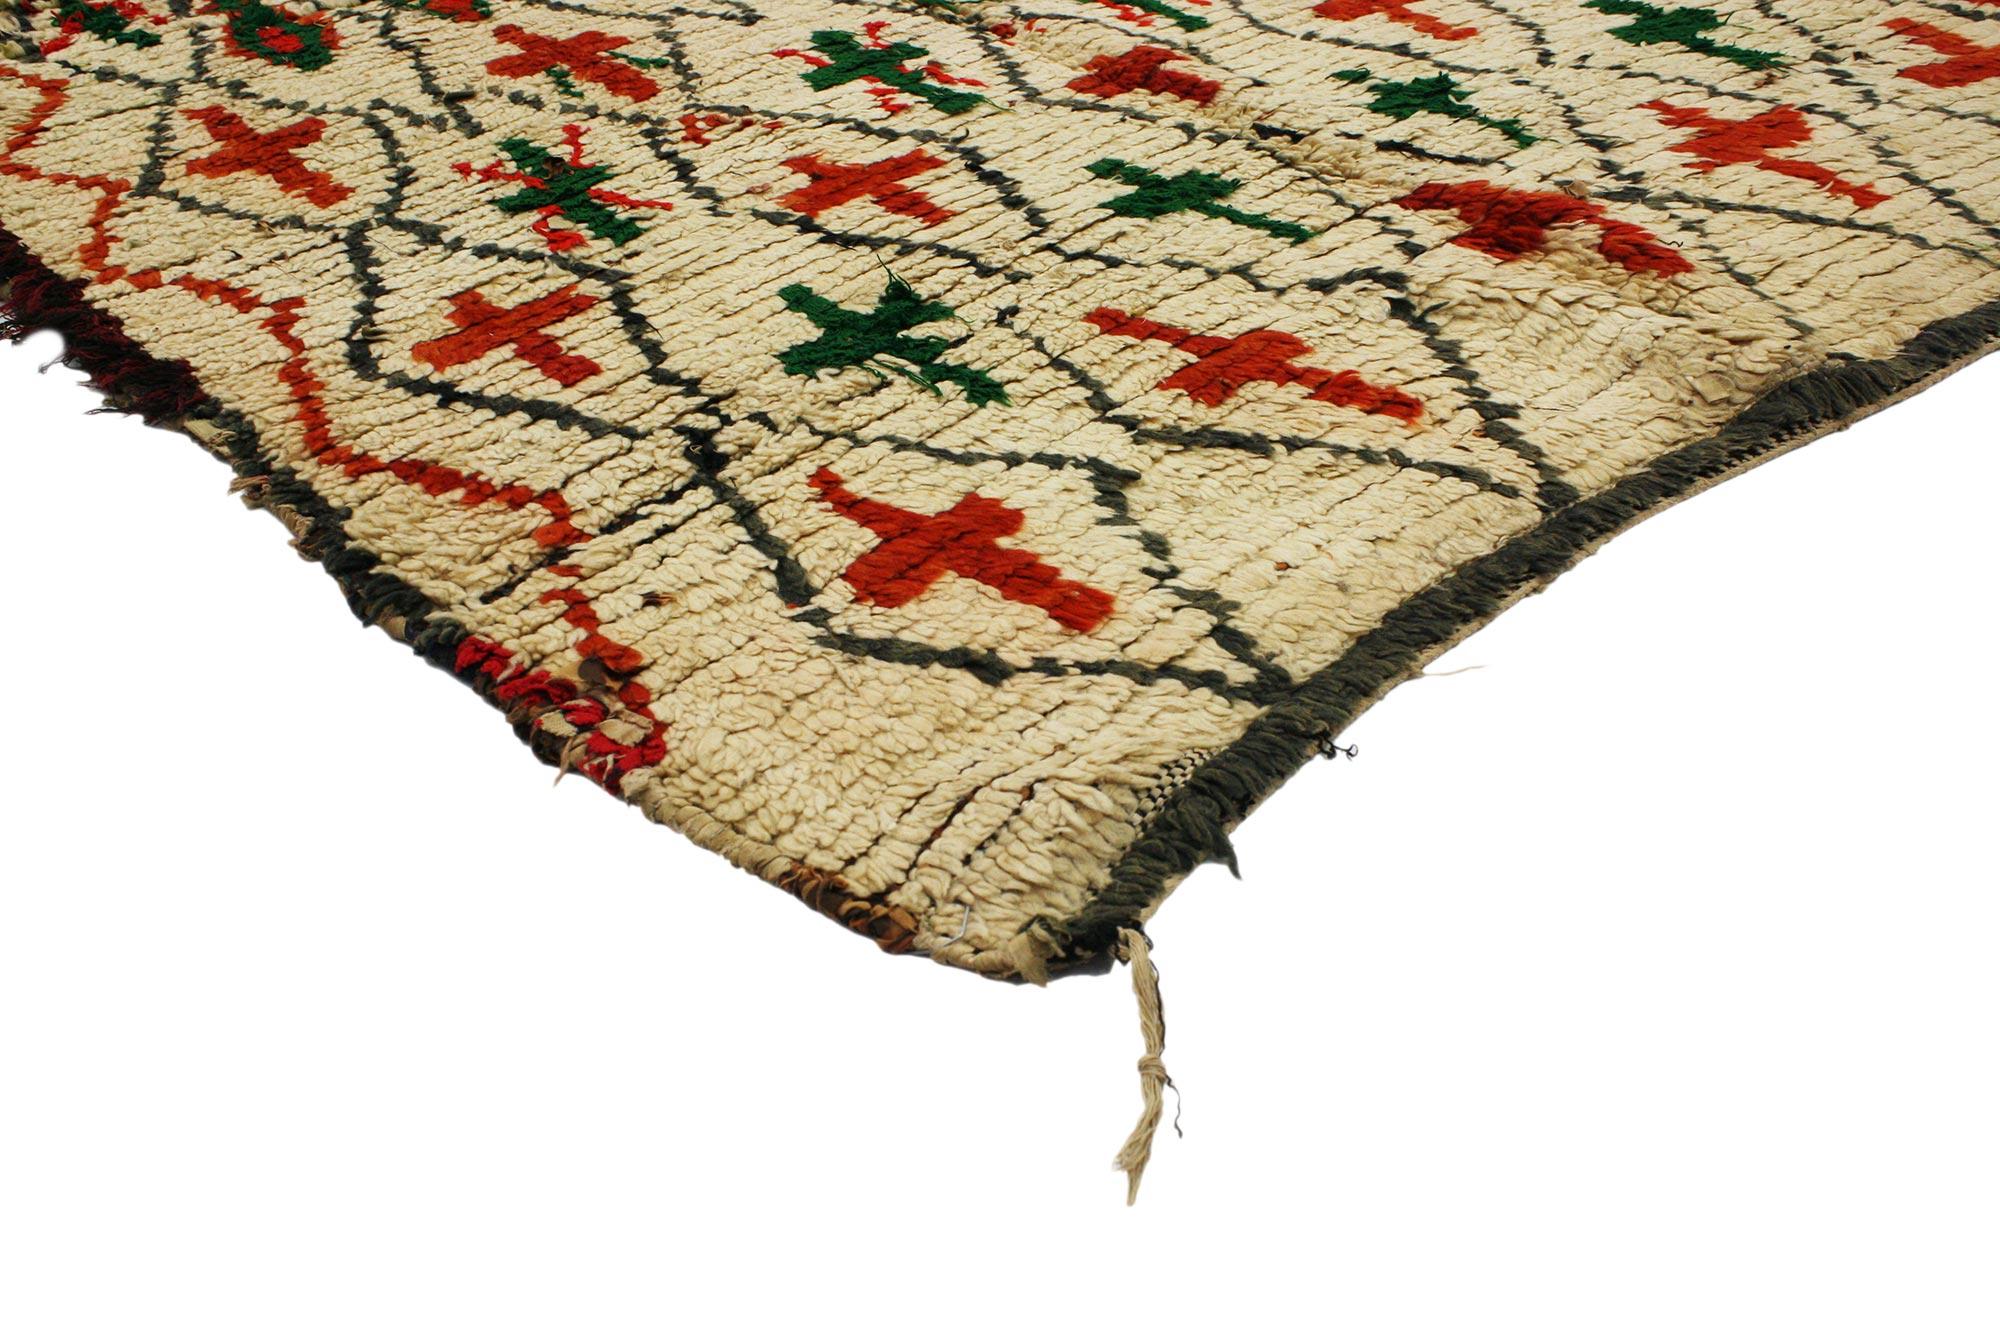 ​74761 Vintage Berber Moroccan Azilal Rug with Modern Tribal Style 04'03 x 05'10. Balancing Berber charm and tribal style, this hand knotted wool vintage Moroccan Azilal rug features a diamond trellis dotted with cross motifs, lozenges, and